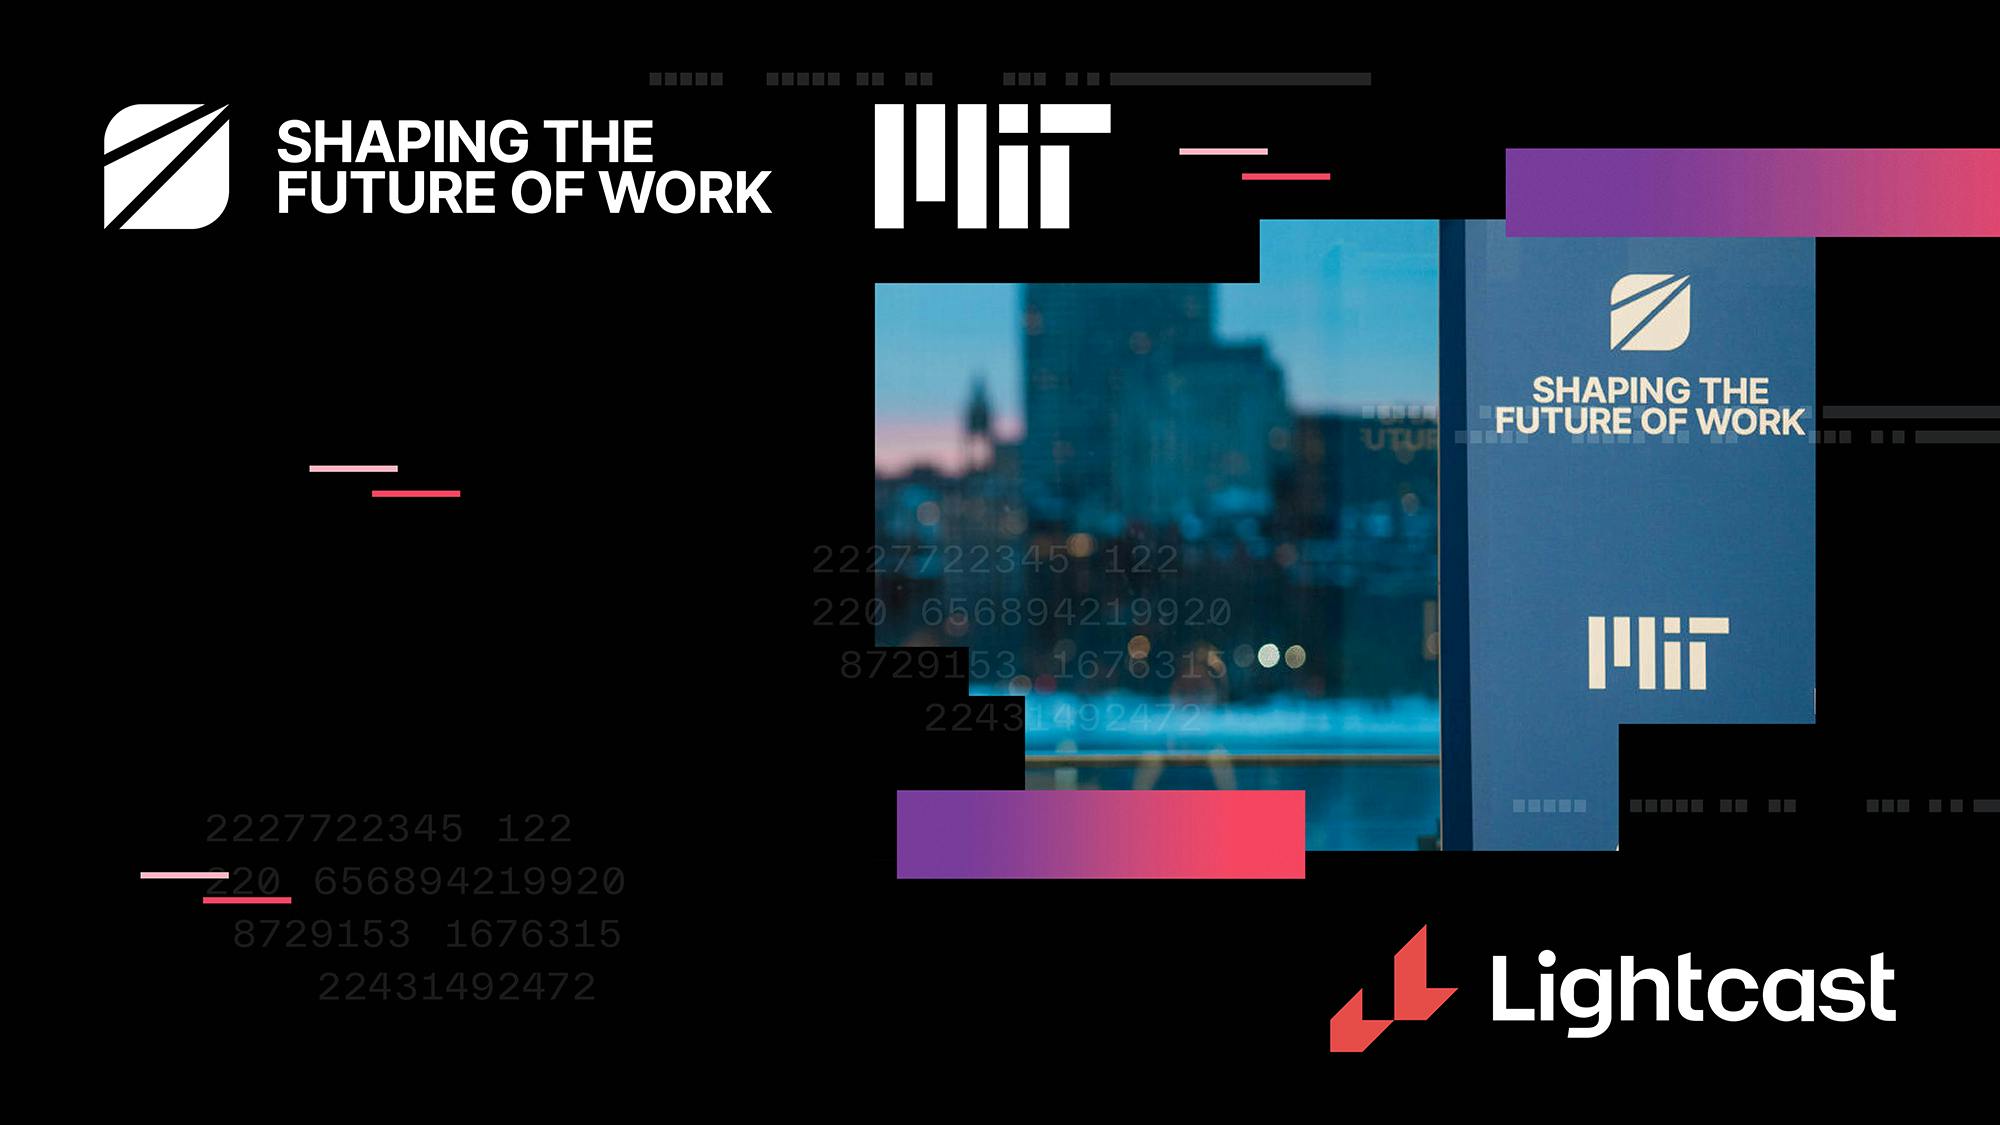 MIT Shaping the Future of Work